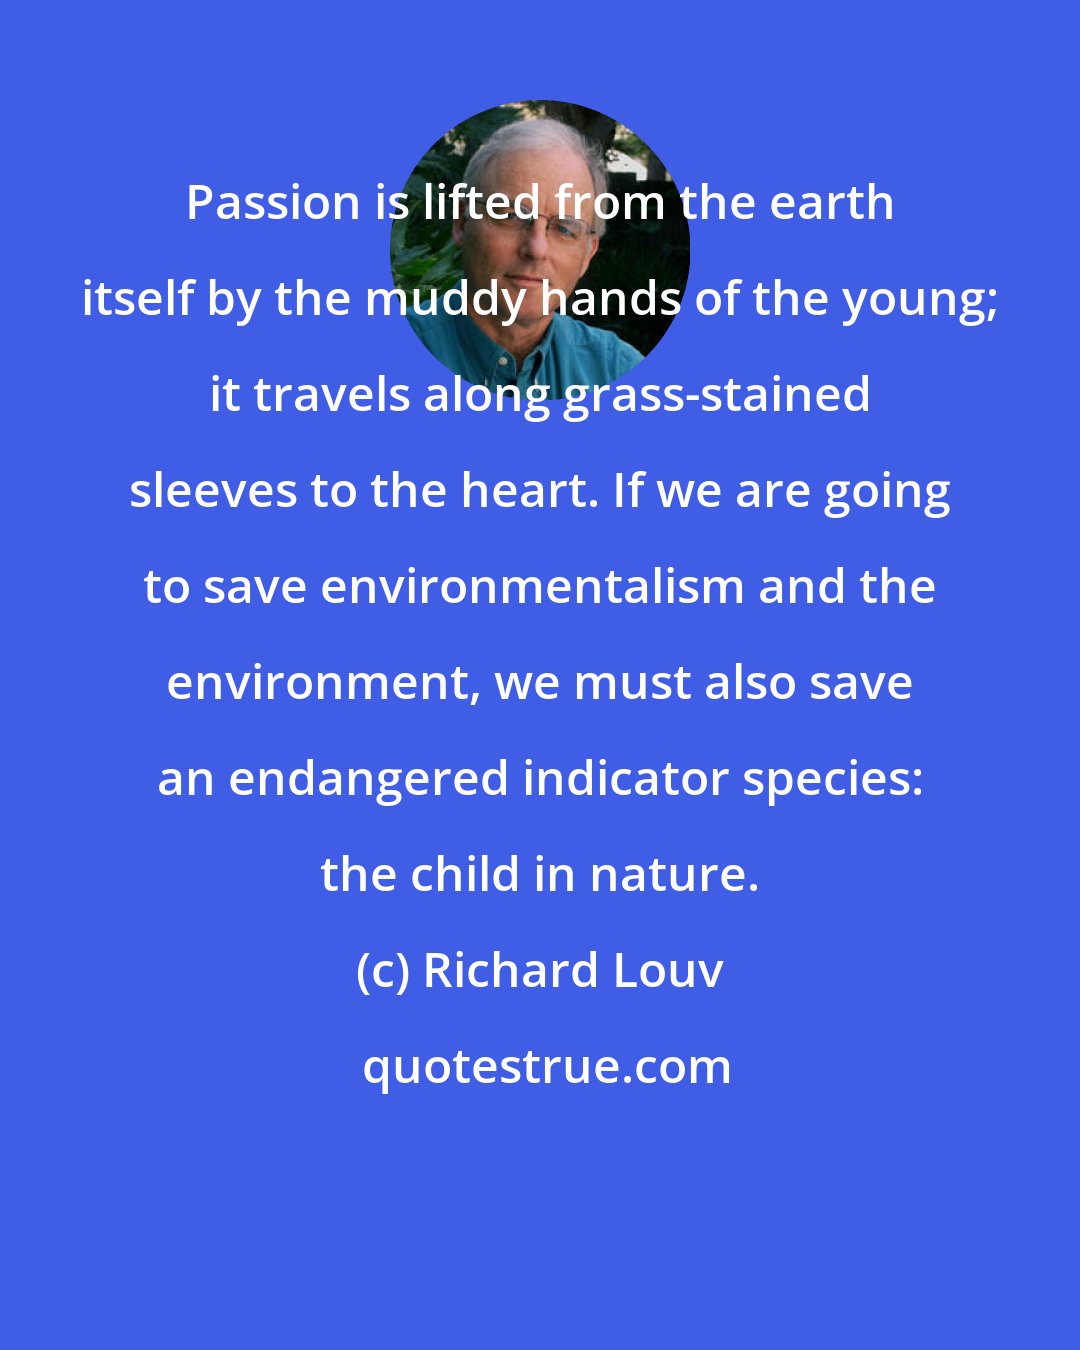 Richard Louv: Passion is lifted from the earth itself by the muddy hands of the young; it travels along grass-stained sleeves to the heart. If we are going to save environmentalism and the environment, we must also save an endangered indicator species: the child in nature.